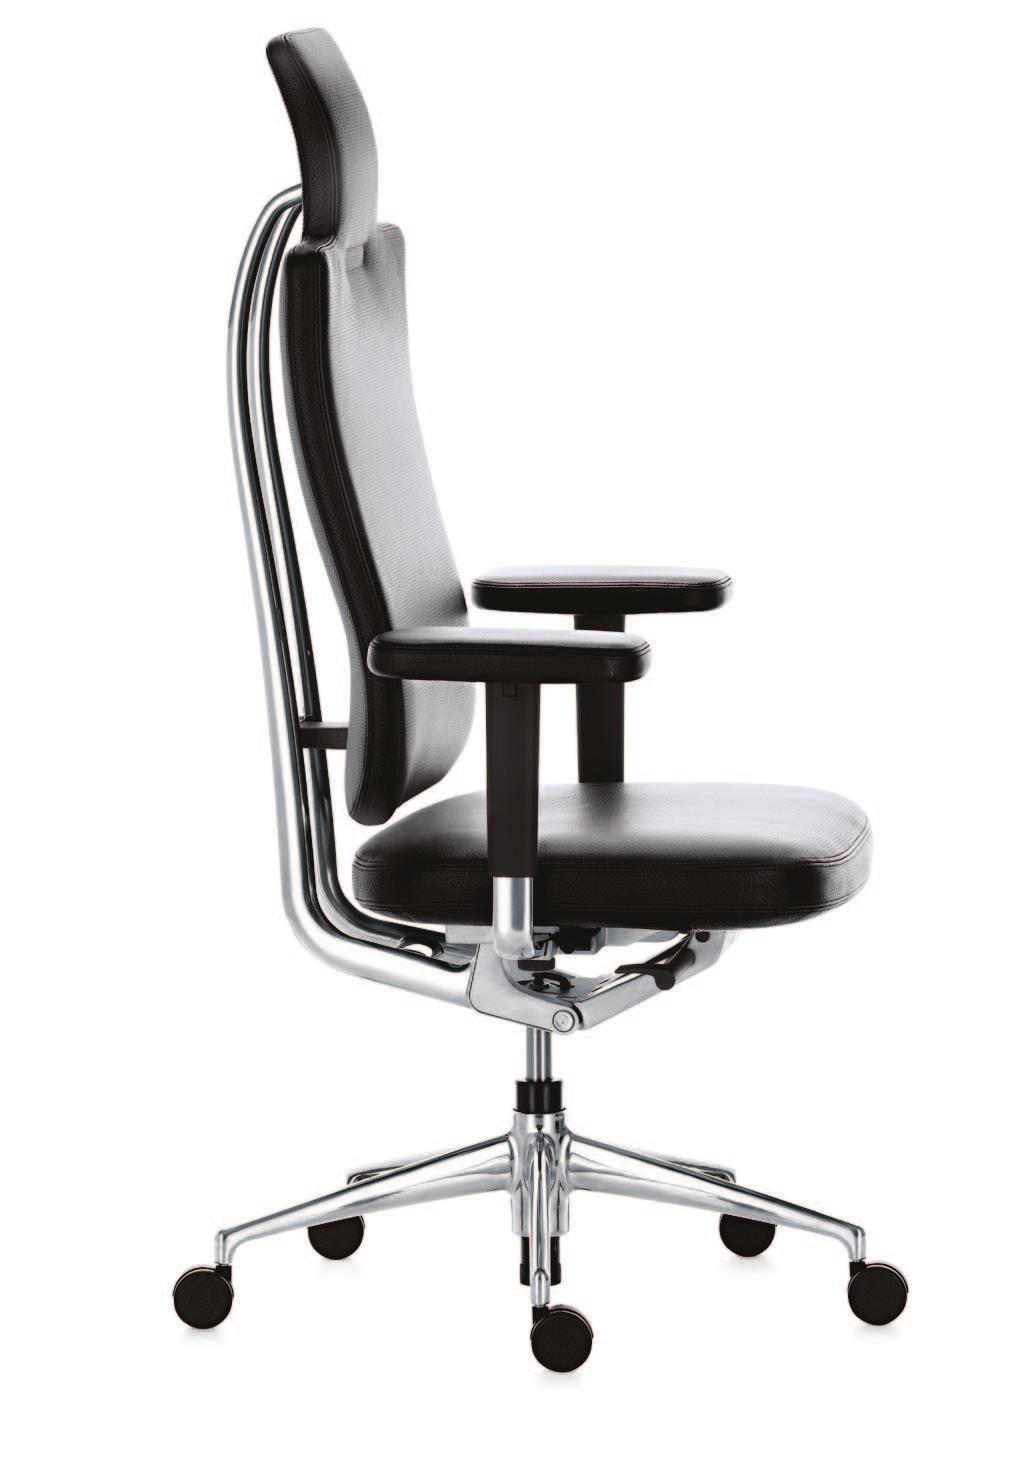 Adjustable height and width of armrests, optional 3D adjustability. Automatic flexibility makes it possible to lean back while the head is supported and the visual angle remains horizontal.